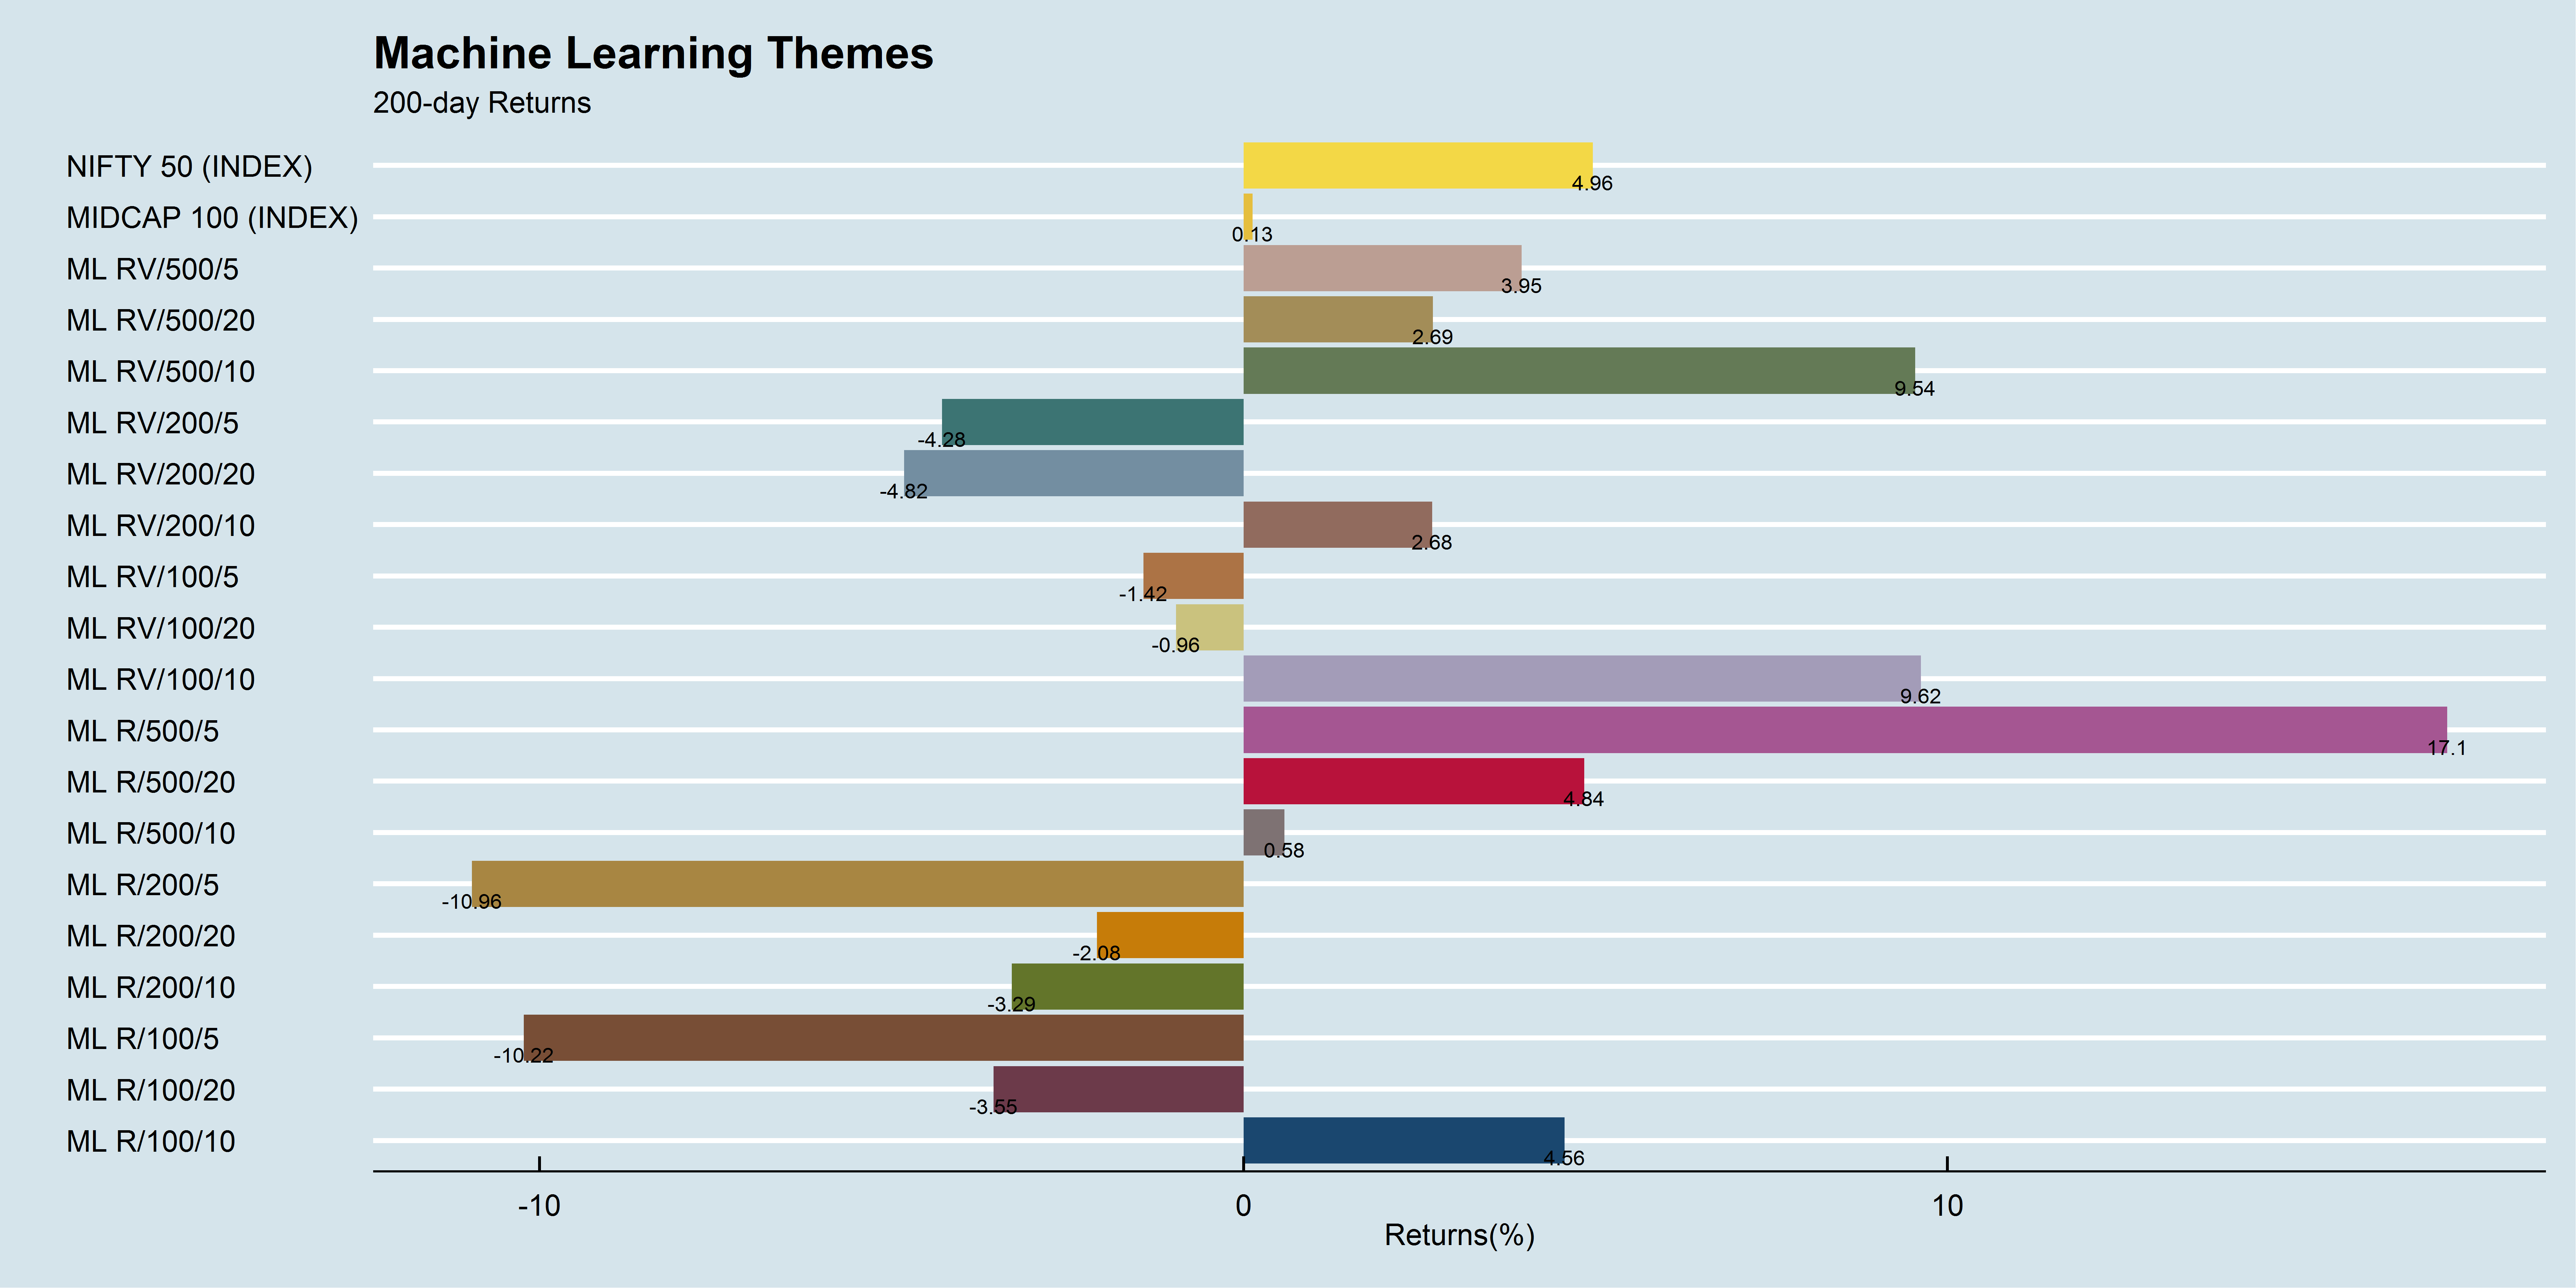 Machine Learning Themes 200-day performance